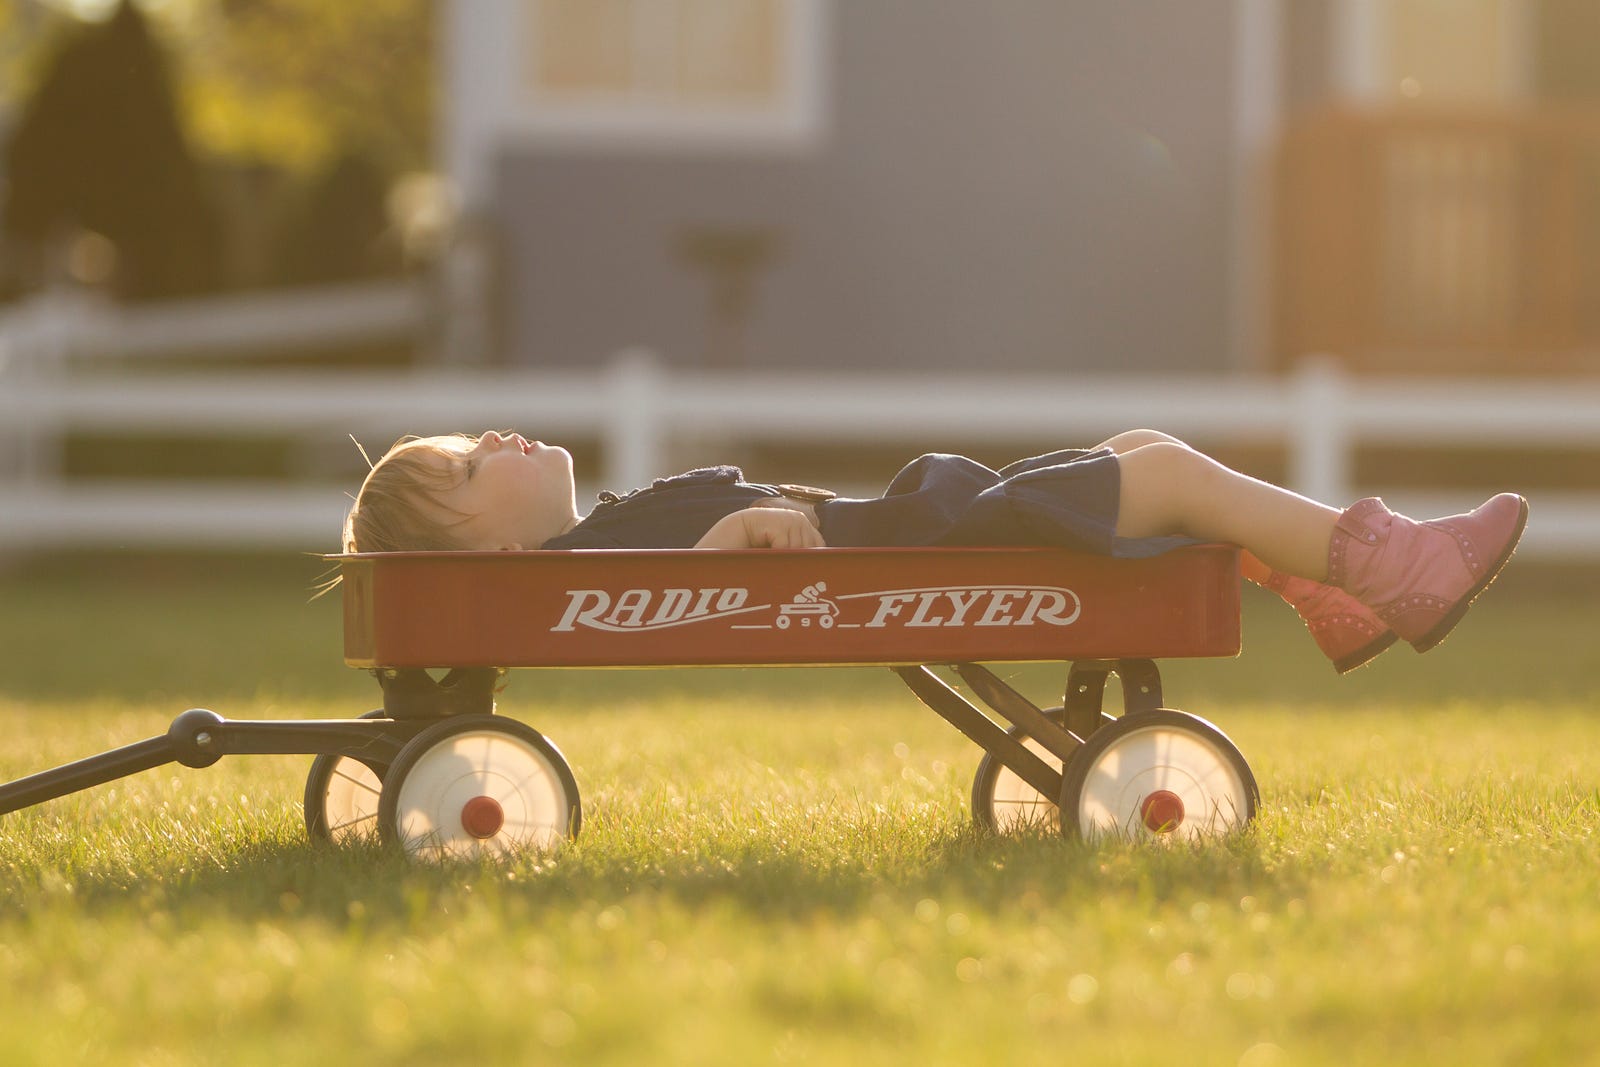 A young child sleeps in a wagon, his legs extending beond the end of it. Power naps are short, taking advantage of our sleep cycles. We generally move through different sleep phases. Some of these cycles are light, and some are deep. A full sleep cycle spans about 90 minutes.